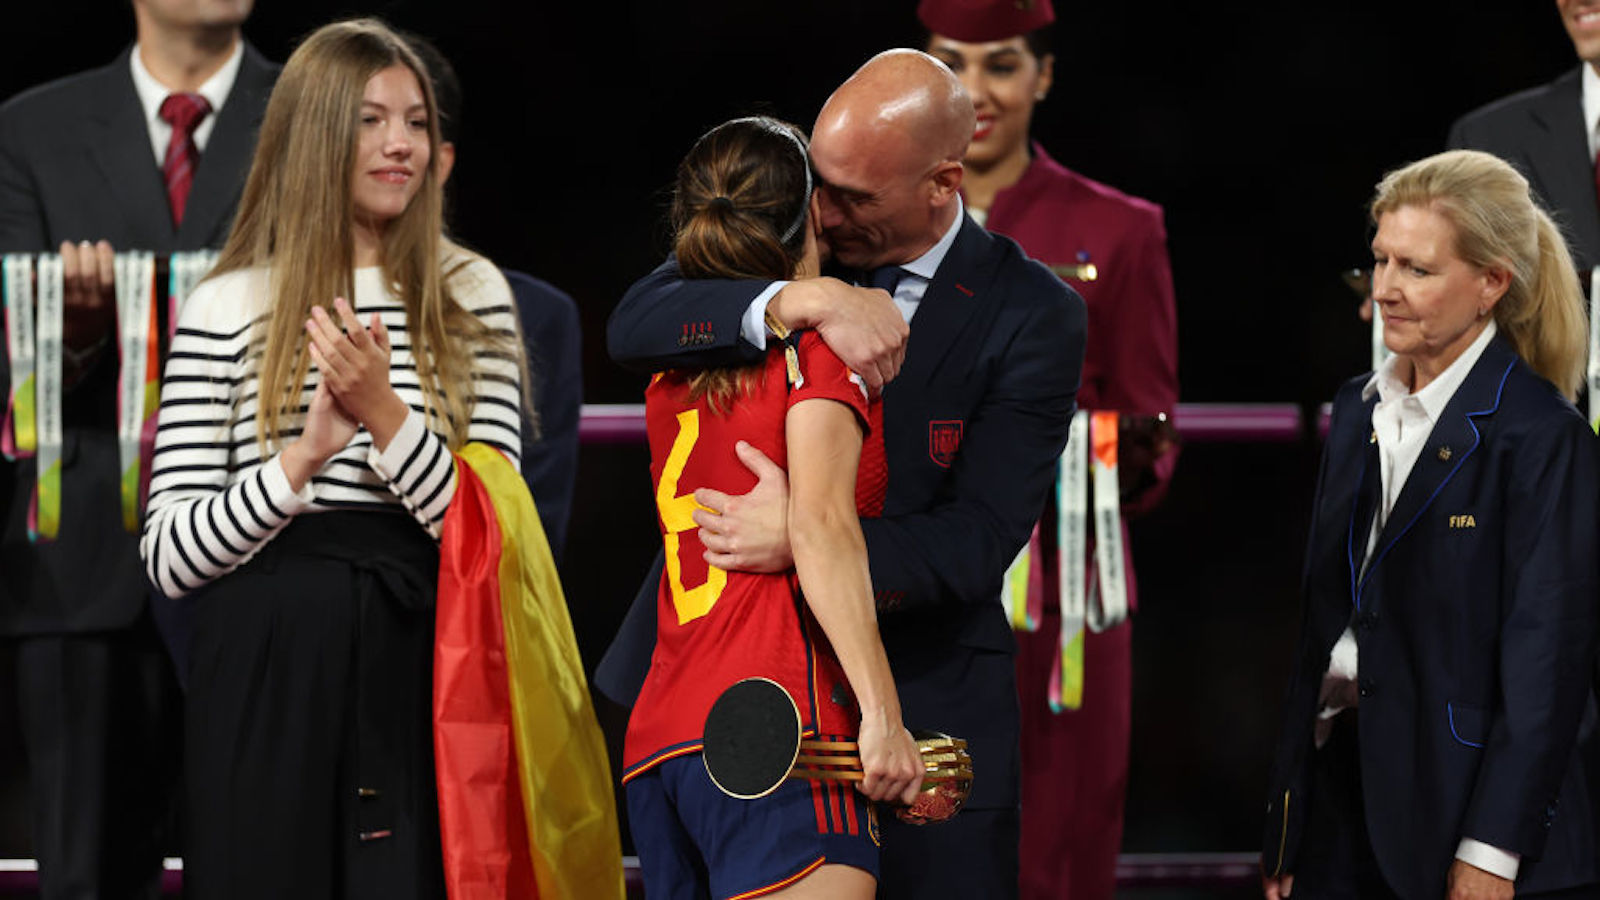 Spain hoists the trophy after winning the 2023 FIFA Women's World